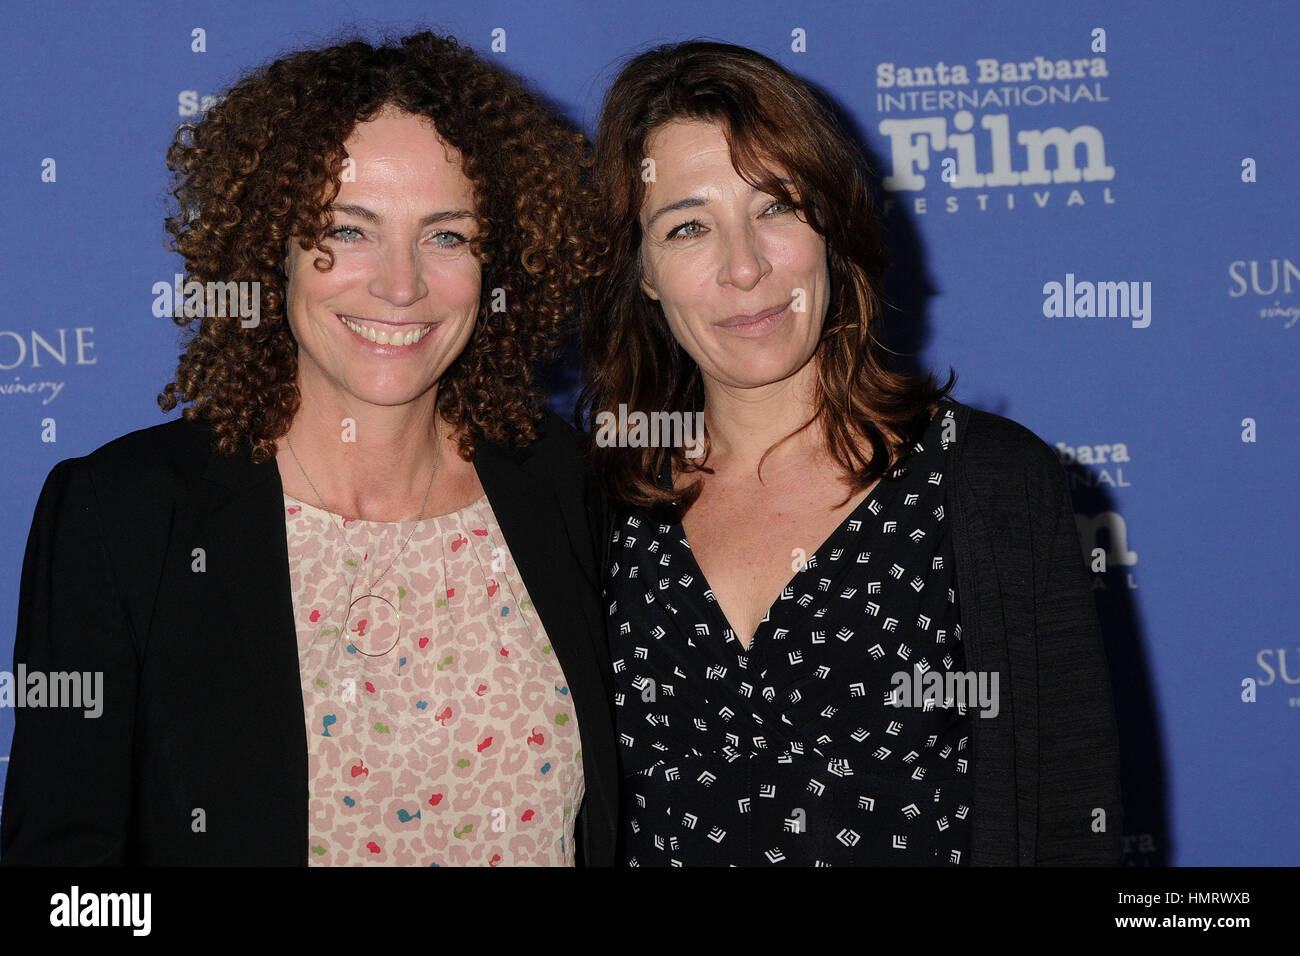 Antoinette Beumer And Marjolein Beumer High Resolution Stock Photography  and Images - Alamy